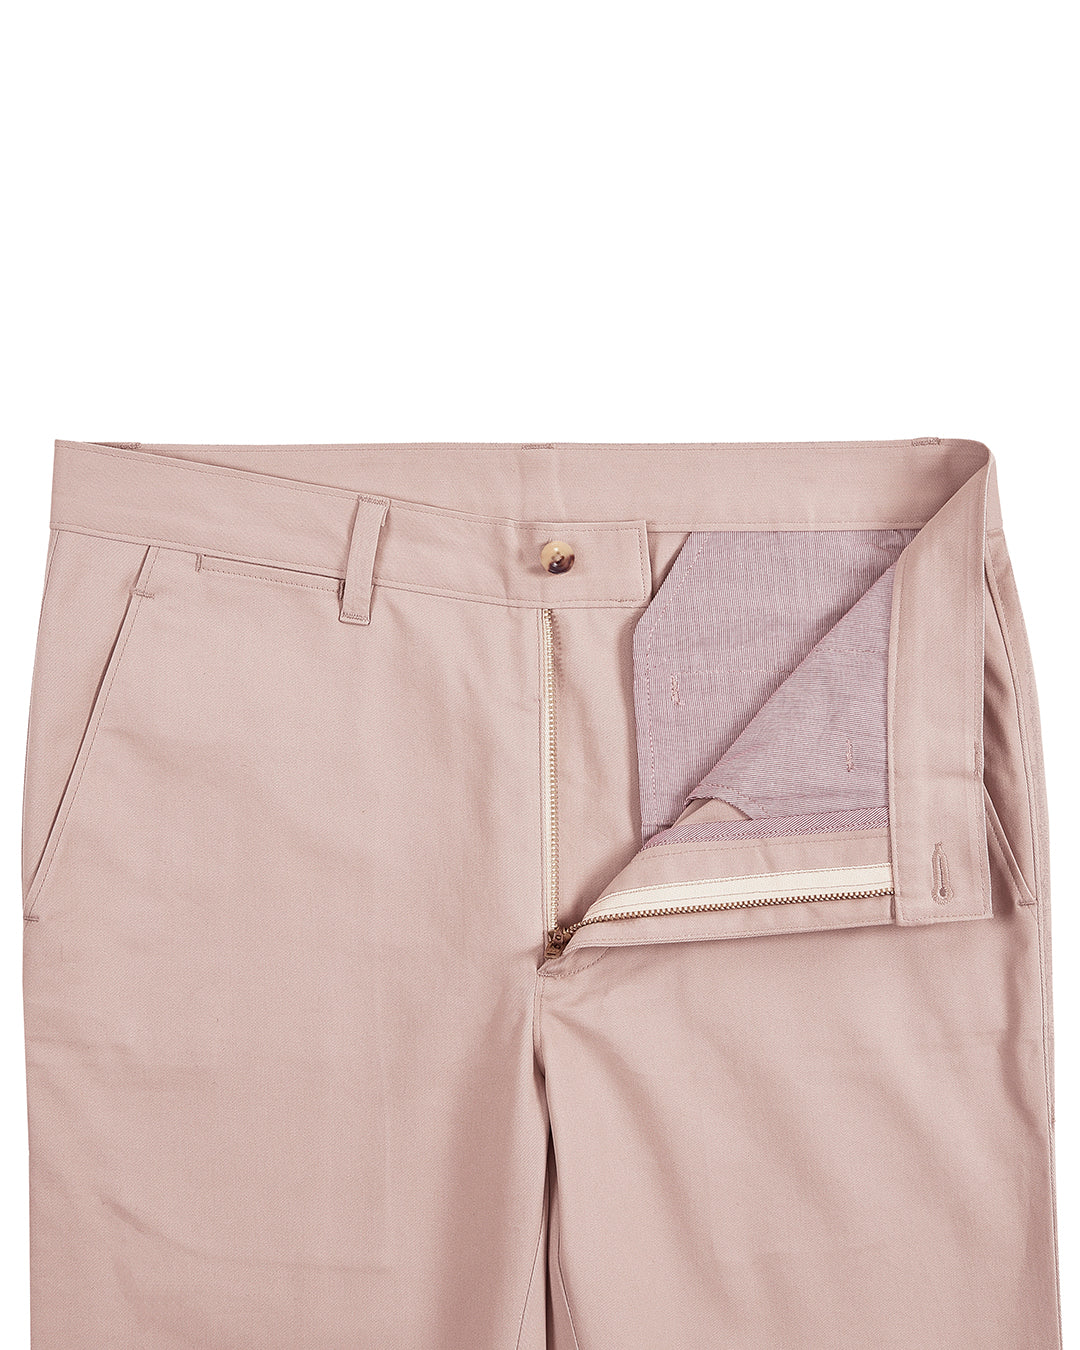 Front open view of custom Genoa Chino pants for men by Luxire in pale pink